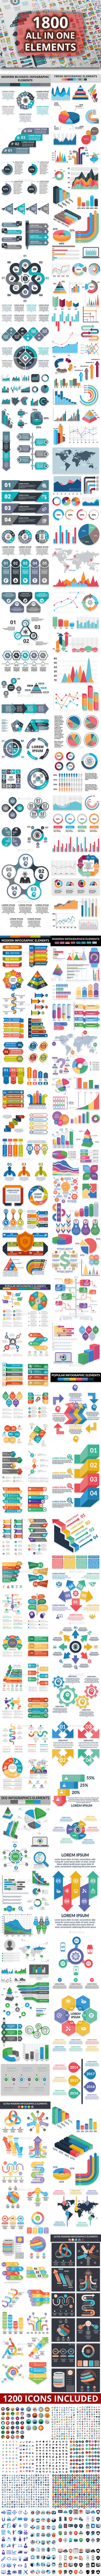 All in One Bundle Infographic Elements